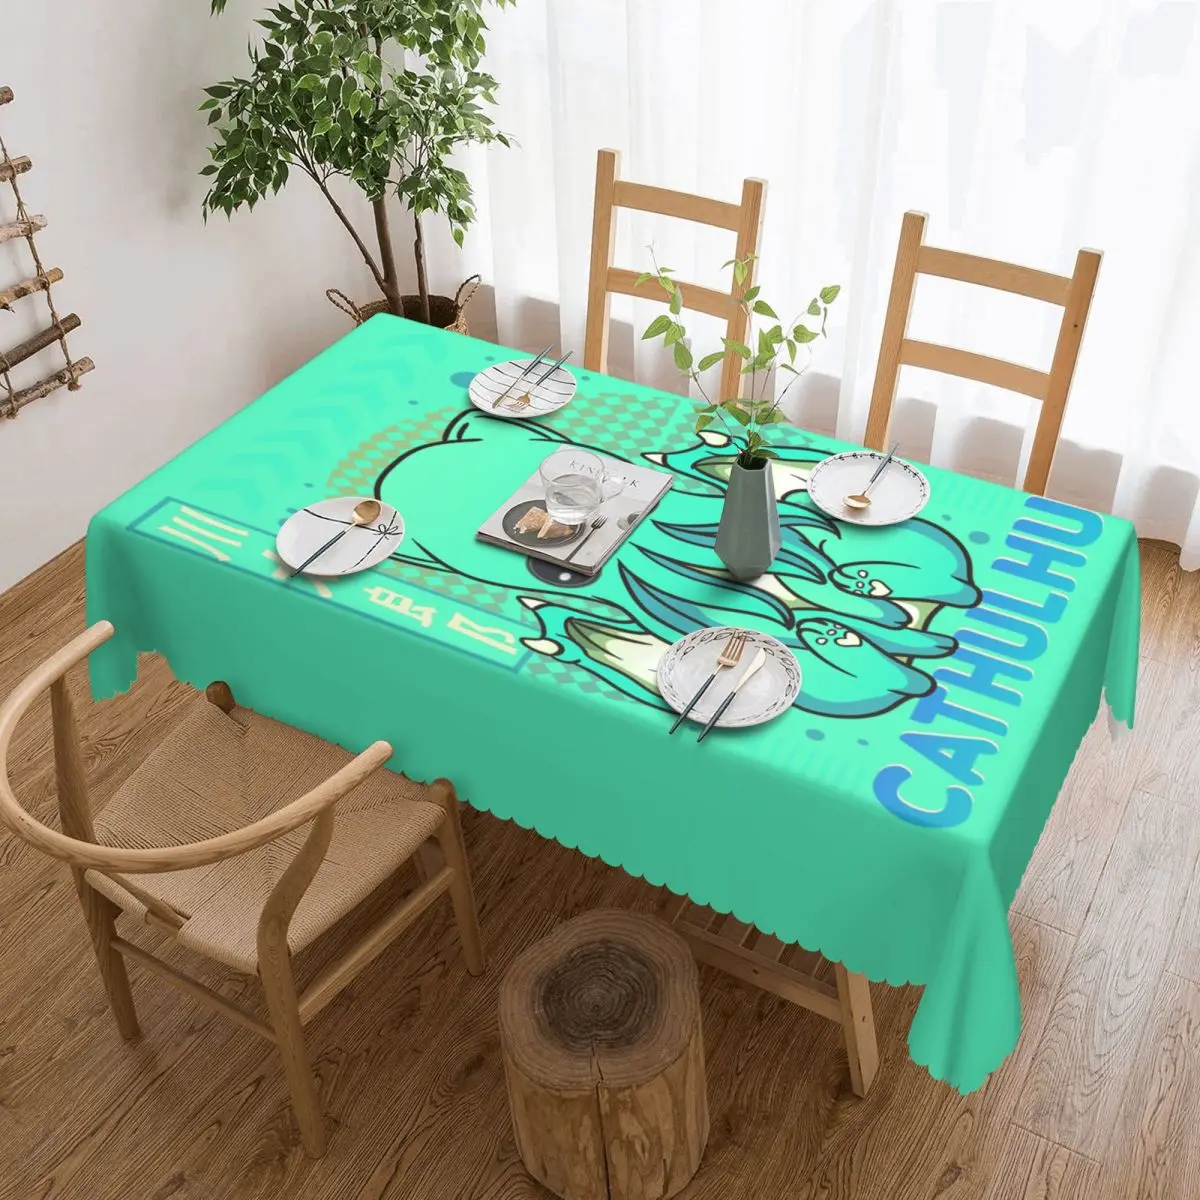 

Rectangular Waterproof Cute Cathulhu Cthulhu Cat Table Cover Table Cloth Tablecloth for Dining